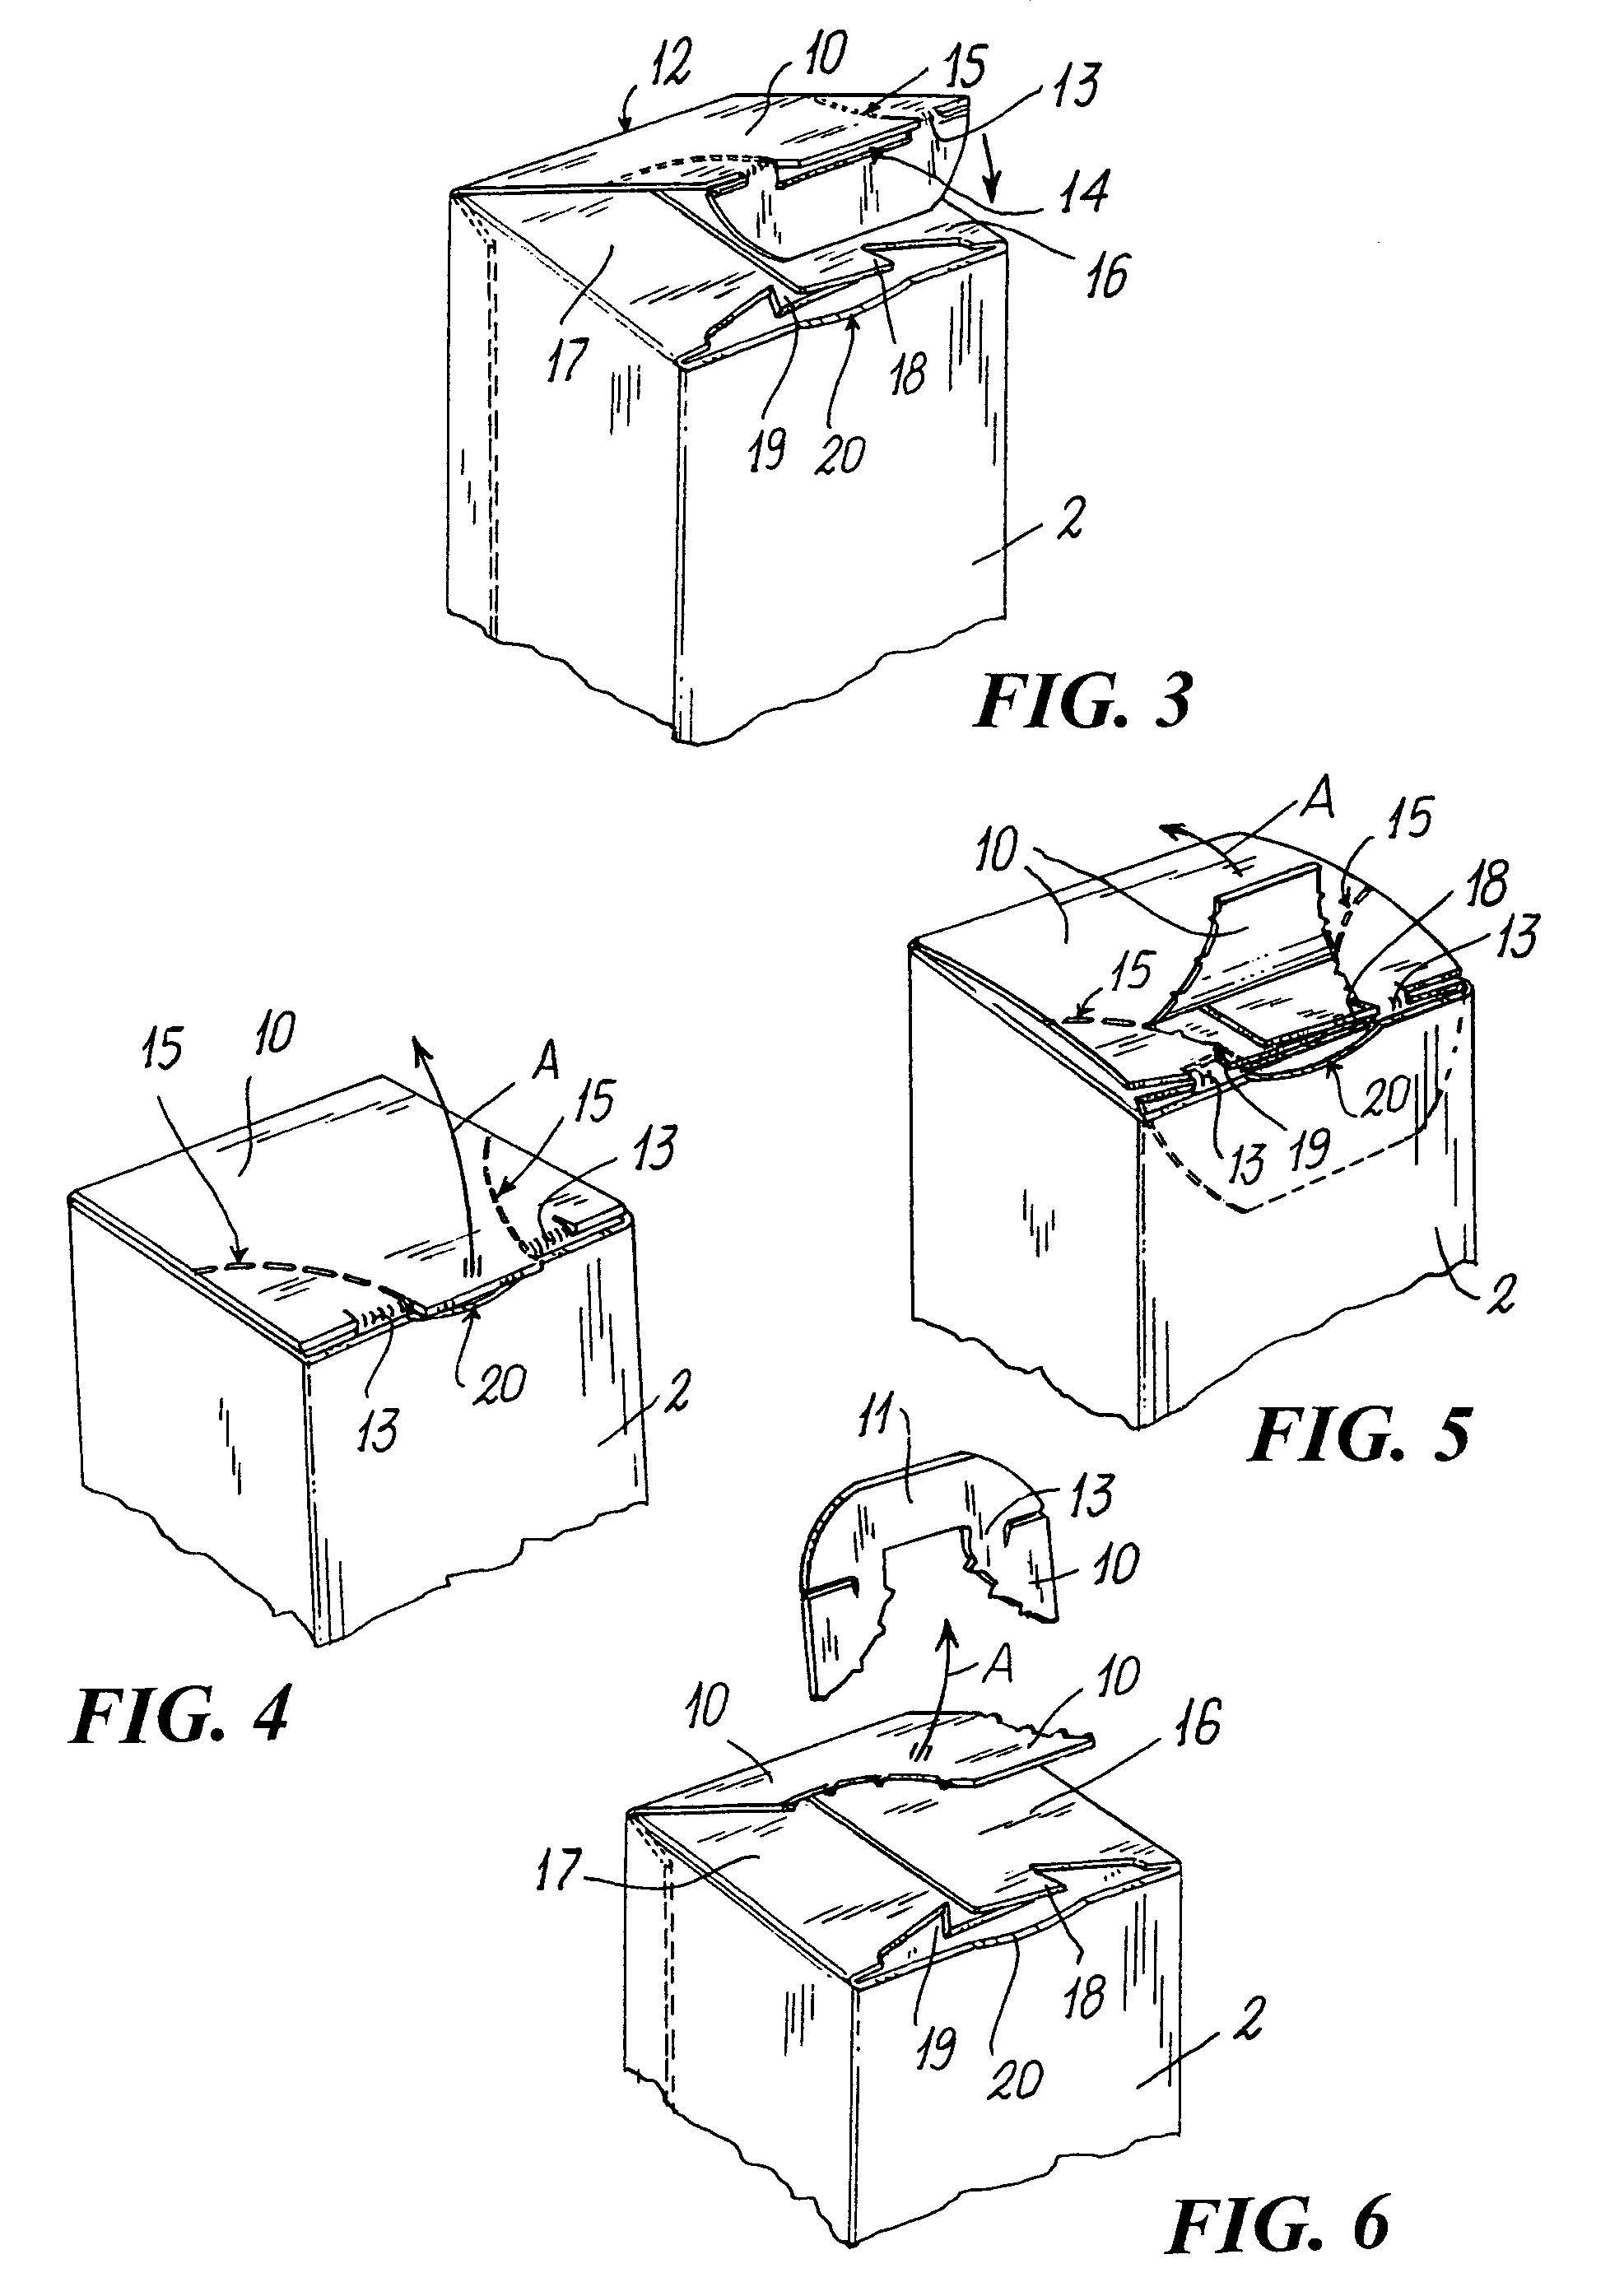 Box with a base resistant to opening and having portions thereof breakable to prevent the box from being reclosed after initial opening thereof